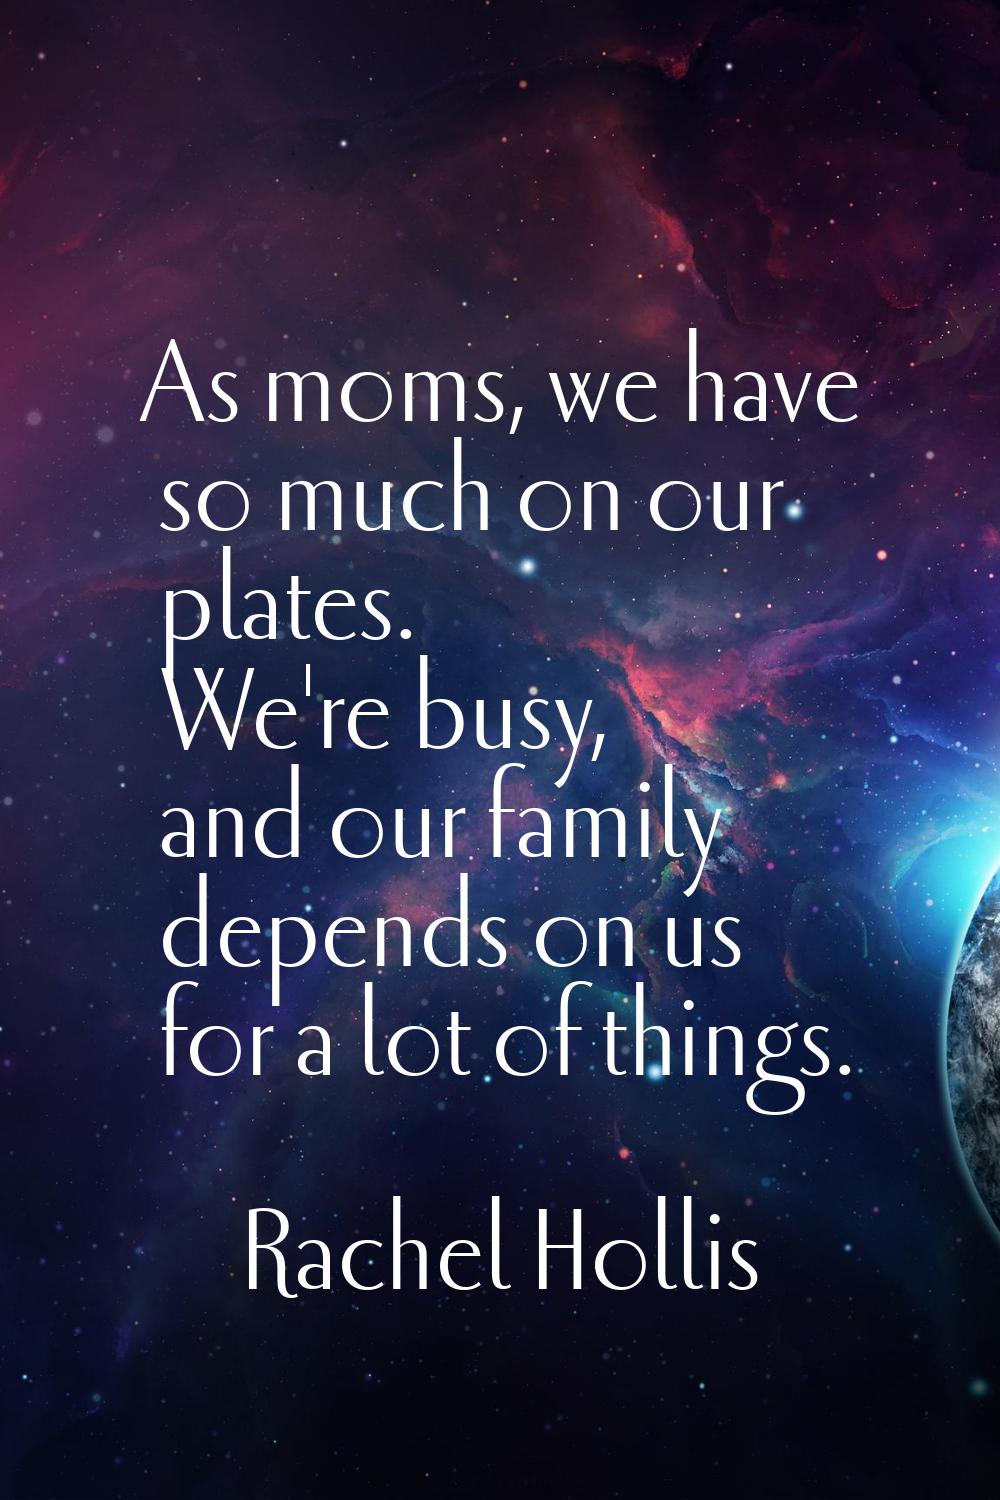 As moms, we have so much on our plates. We're busy, and our family depends on us for a lot of thing